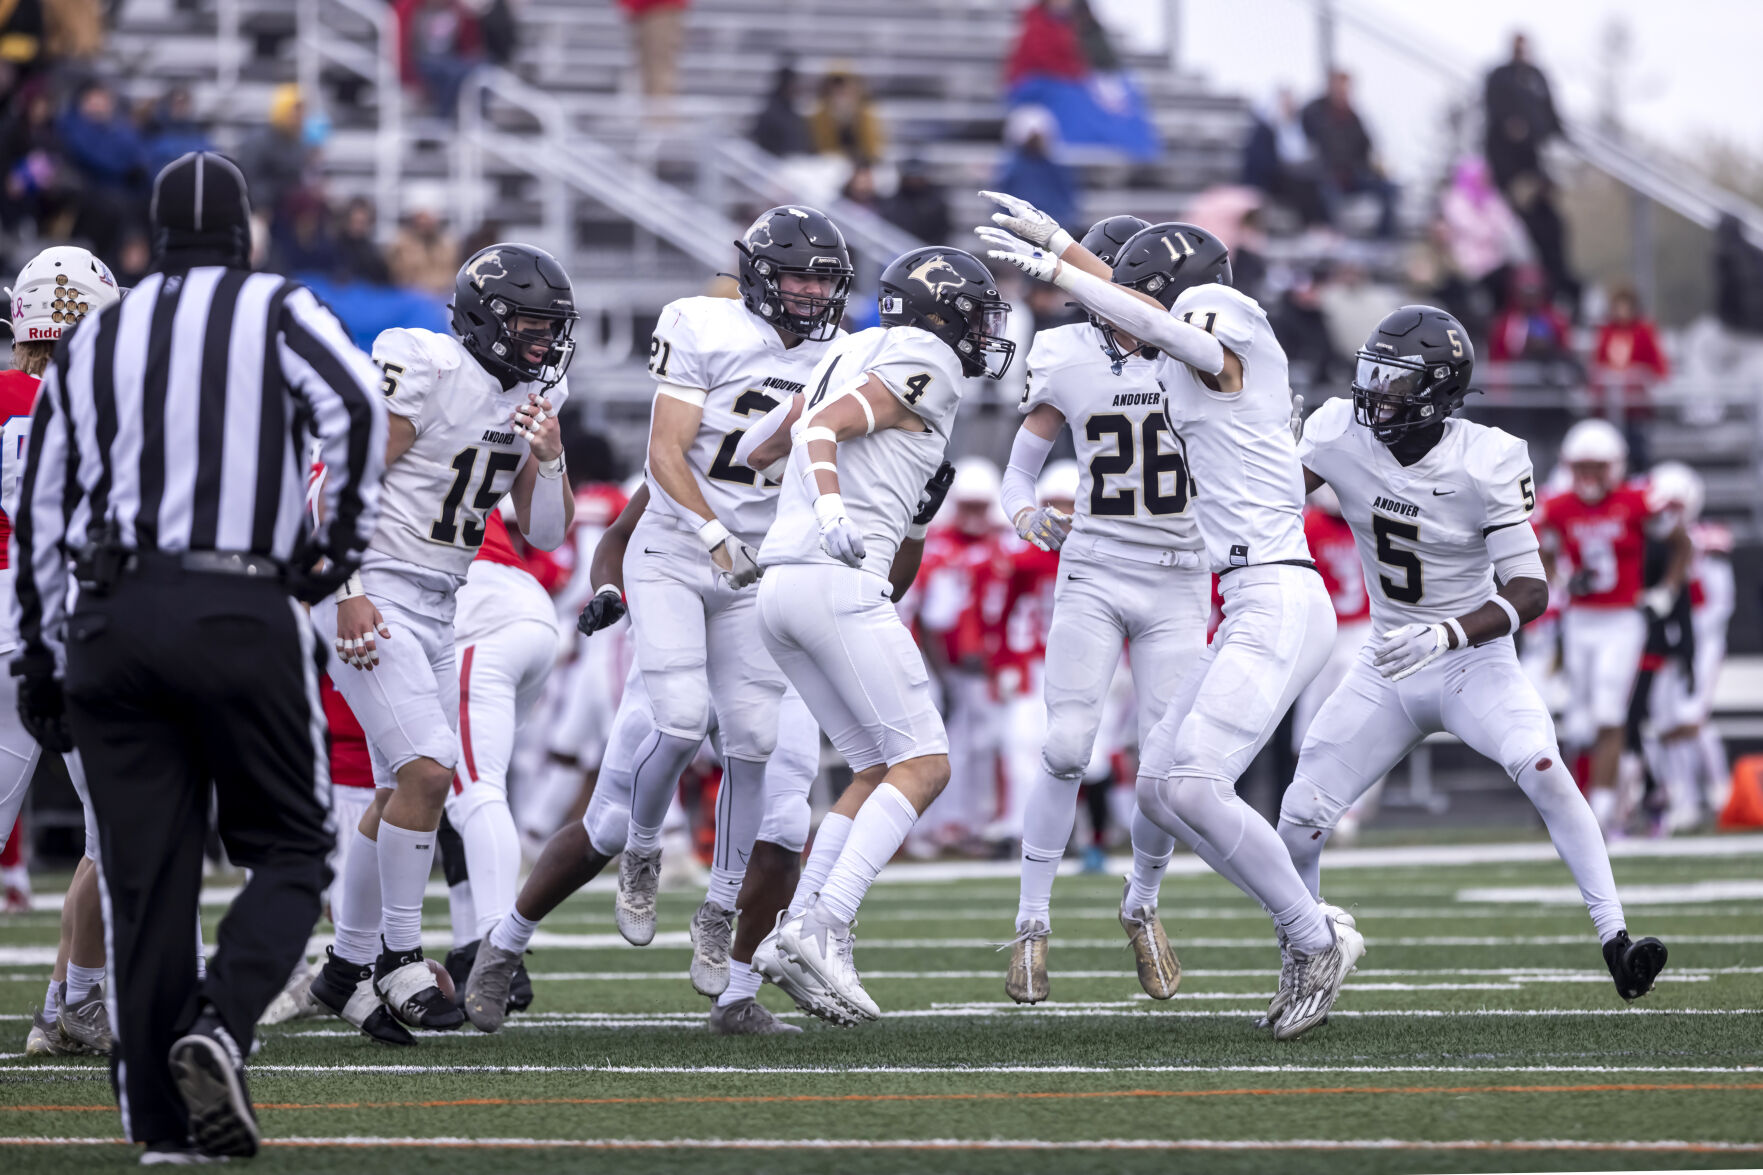 Football: Andover powers past Armstrong to earn trip first-ever state semifinal